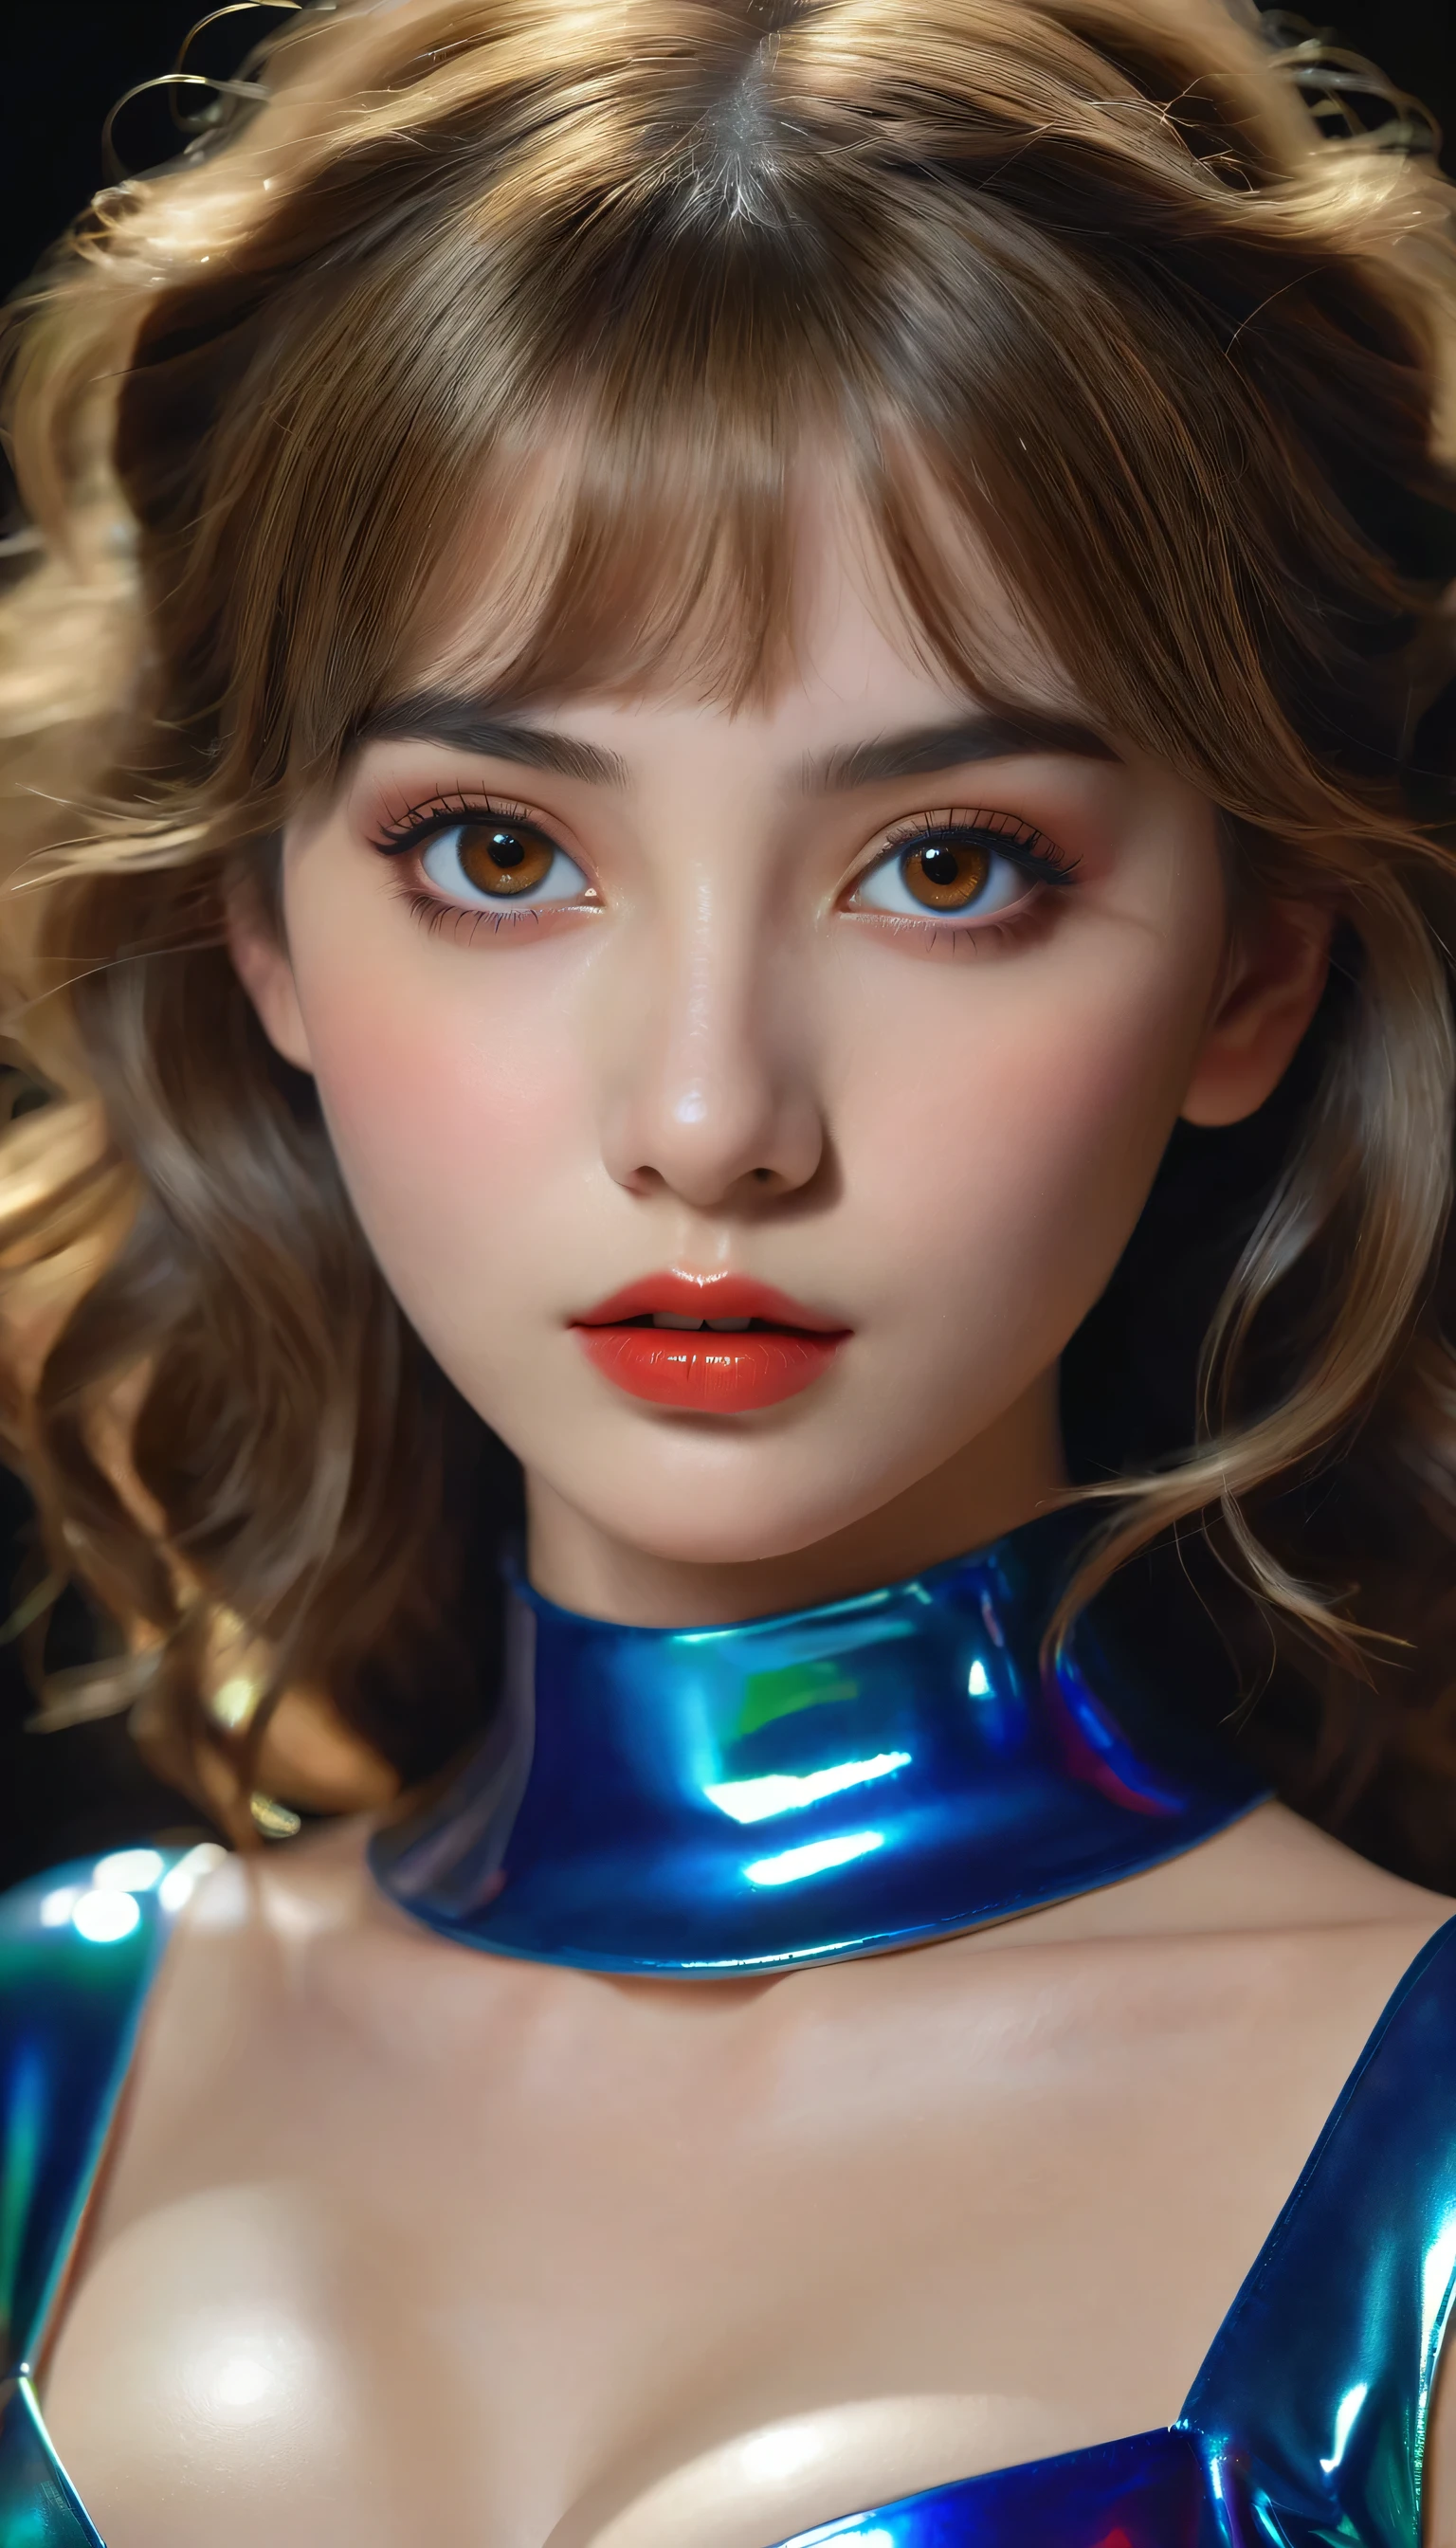 photorealistic Realism 8K, 16K Quality, (ultra absurd quality, extremely detailed detail, hyper resolution, clear sharp focus, not blurry, (perfect round, Realistic brown eyes)), ((perfect dark_eyeshadows)), (super Detailed, beautiful little nose), (perfect composition), Depth of field, cinematic light, Lens flare, (extremely beautiful face, beautiful lips), pink_makeup:1.22, long_blue_eyeliner:1.28, red_lipstick:1.35,(perfect dark_eyeshadows:1.45), (super detailed professional makeup on eyes:1.3), (Detailed nose:1.2), Intricate detail face, best high quality real texture skin, (A woman with velvety skin), ((best high quality real texture hair)), (short blonde hair, (wavy, combed up, behind the ear), extremely detailed)), photo of the most beautiful artwork in the world, professional majestic (photography by Steve McCurry), 8k uhd, dslr, soft lighting, high quality, Fujifilm XT3 sharp focus, f 5.6, dramatic, (Anatomically correct perfect proportions), ((perfect hands:1.2)), ((perfect female body:1.4)), cute girl, ((firm and full breasts)), ((super beautiful cute sharp-face)), (light pale complexion), transparent color pvc ((full-body shiny latex, full colors Brightly outfit, holograph tight latex:1.24)), ((zoom out the camera:1.3))